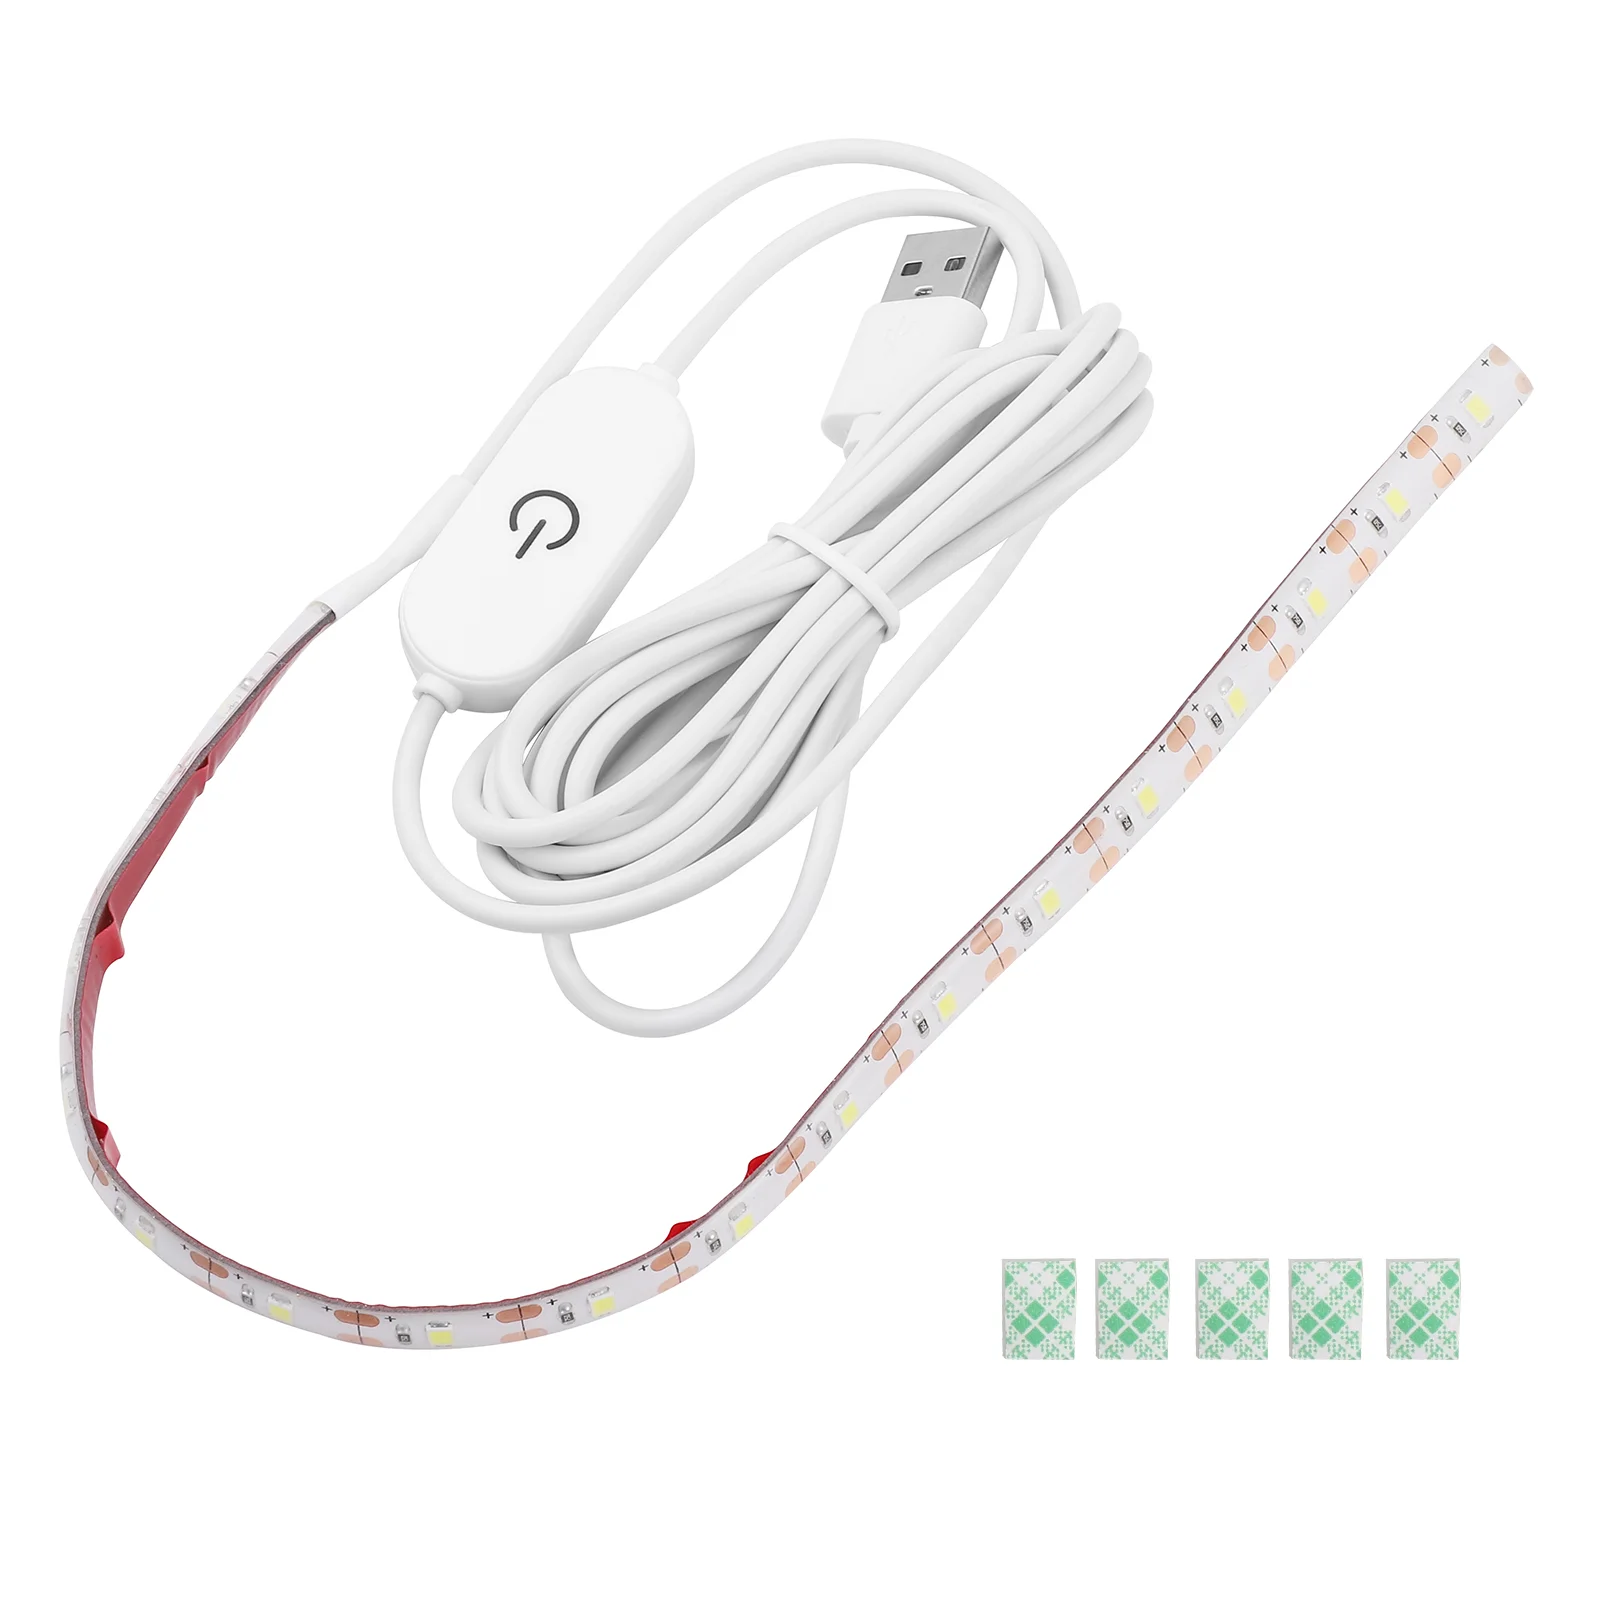 

Mobestech Sewing Machine LED Light 2M Cold White Strip Light with Touch Dimmer USB Powered 5V Adhesive Light